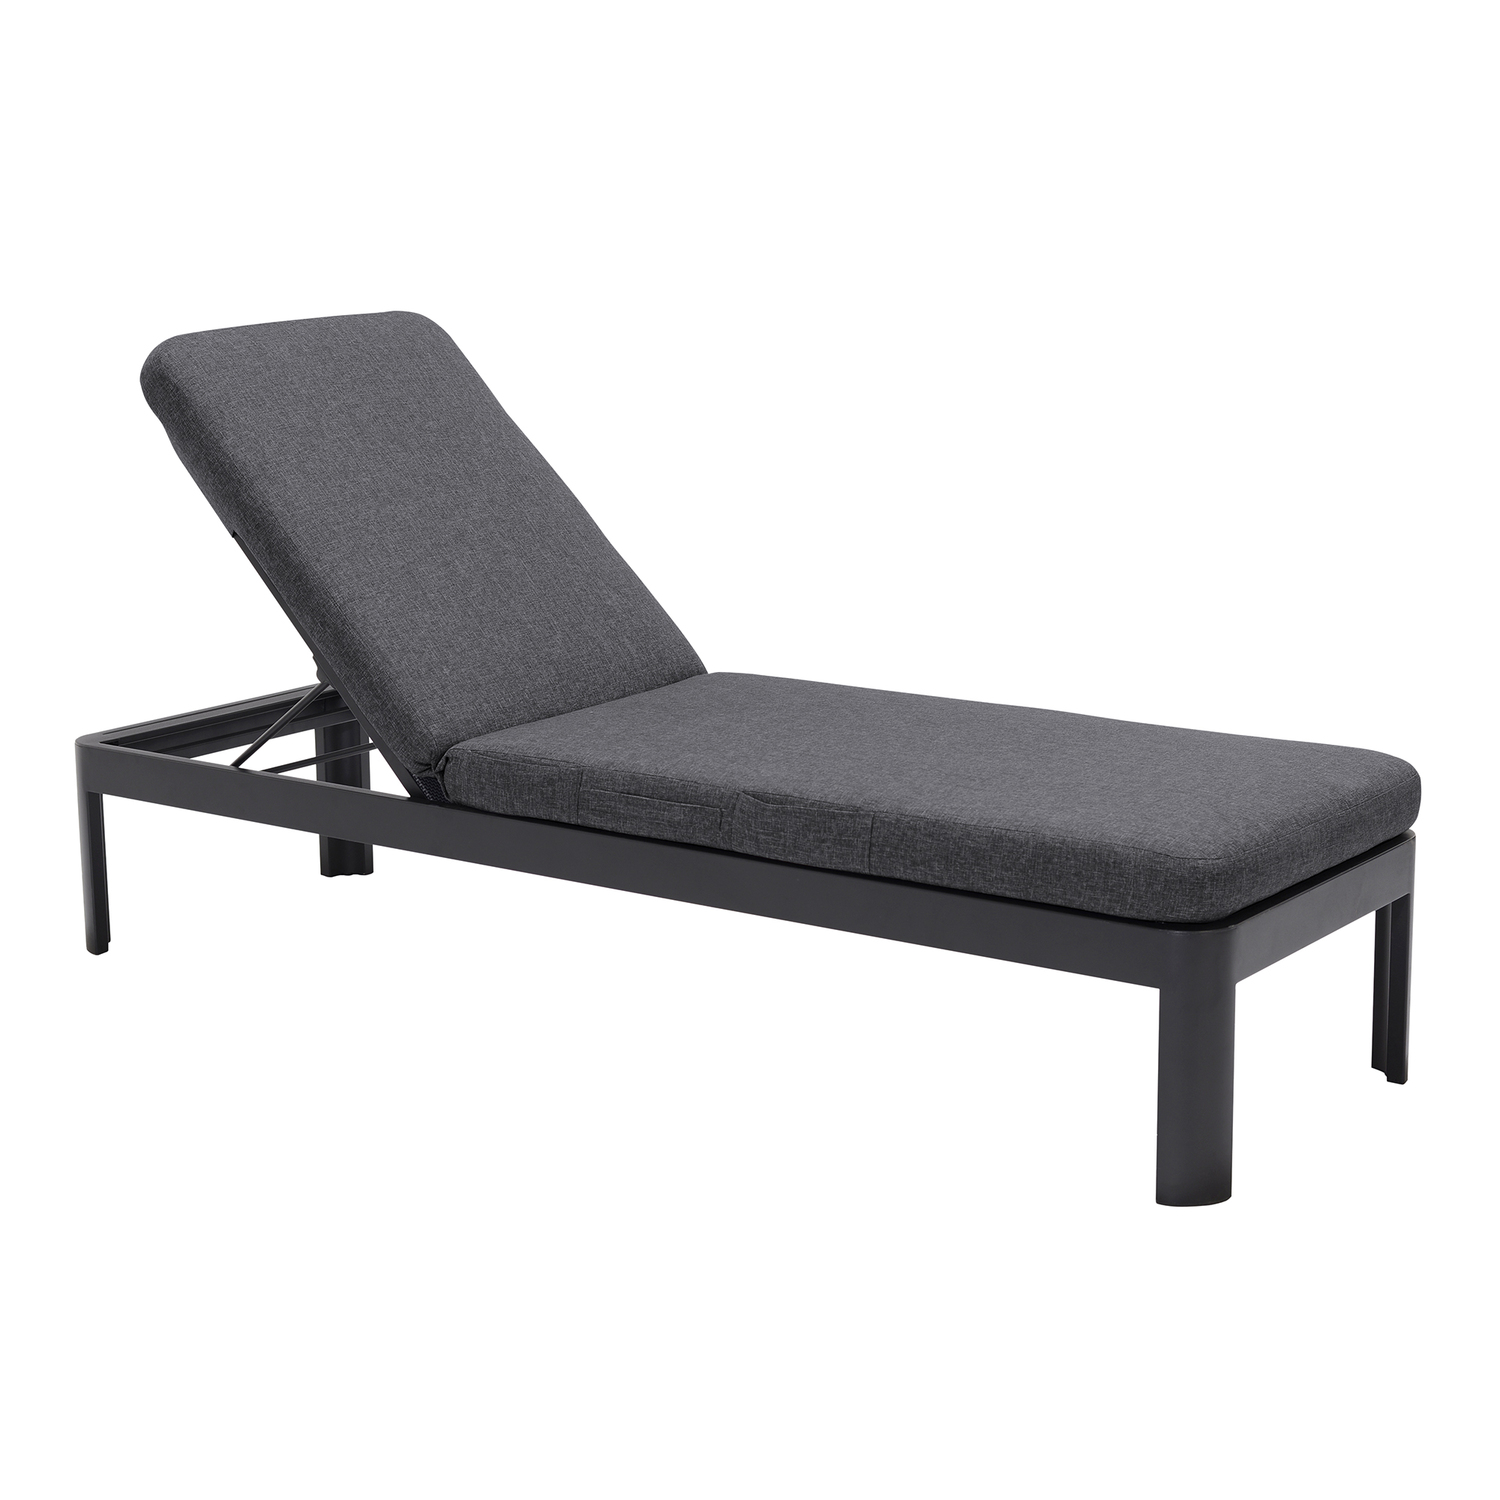 Portals Outdoor Chaise Lounge Chair in Black Finish and Grey Cushions - image 1 of 5